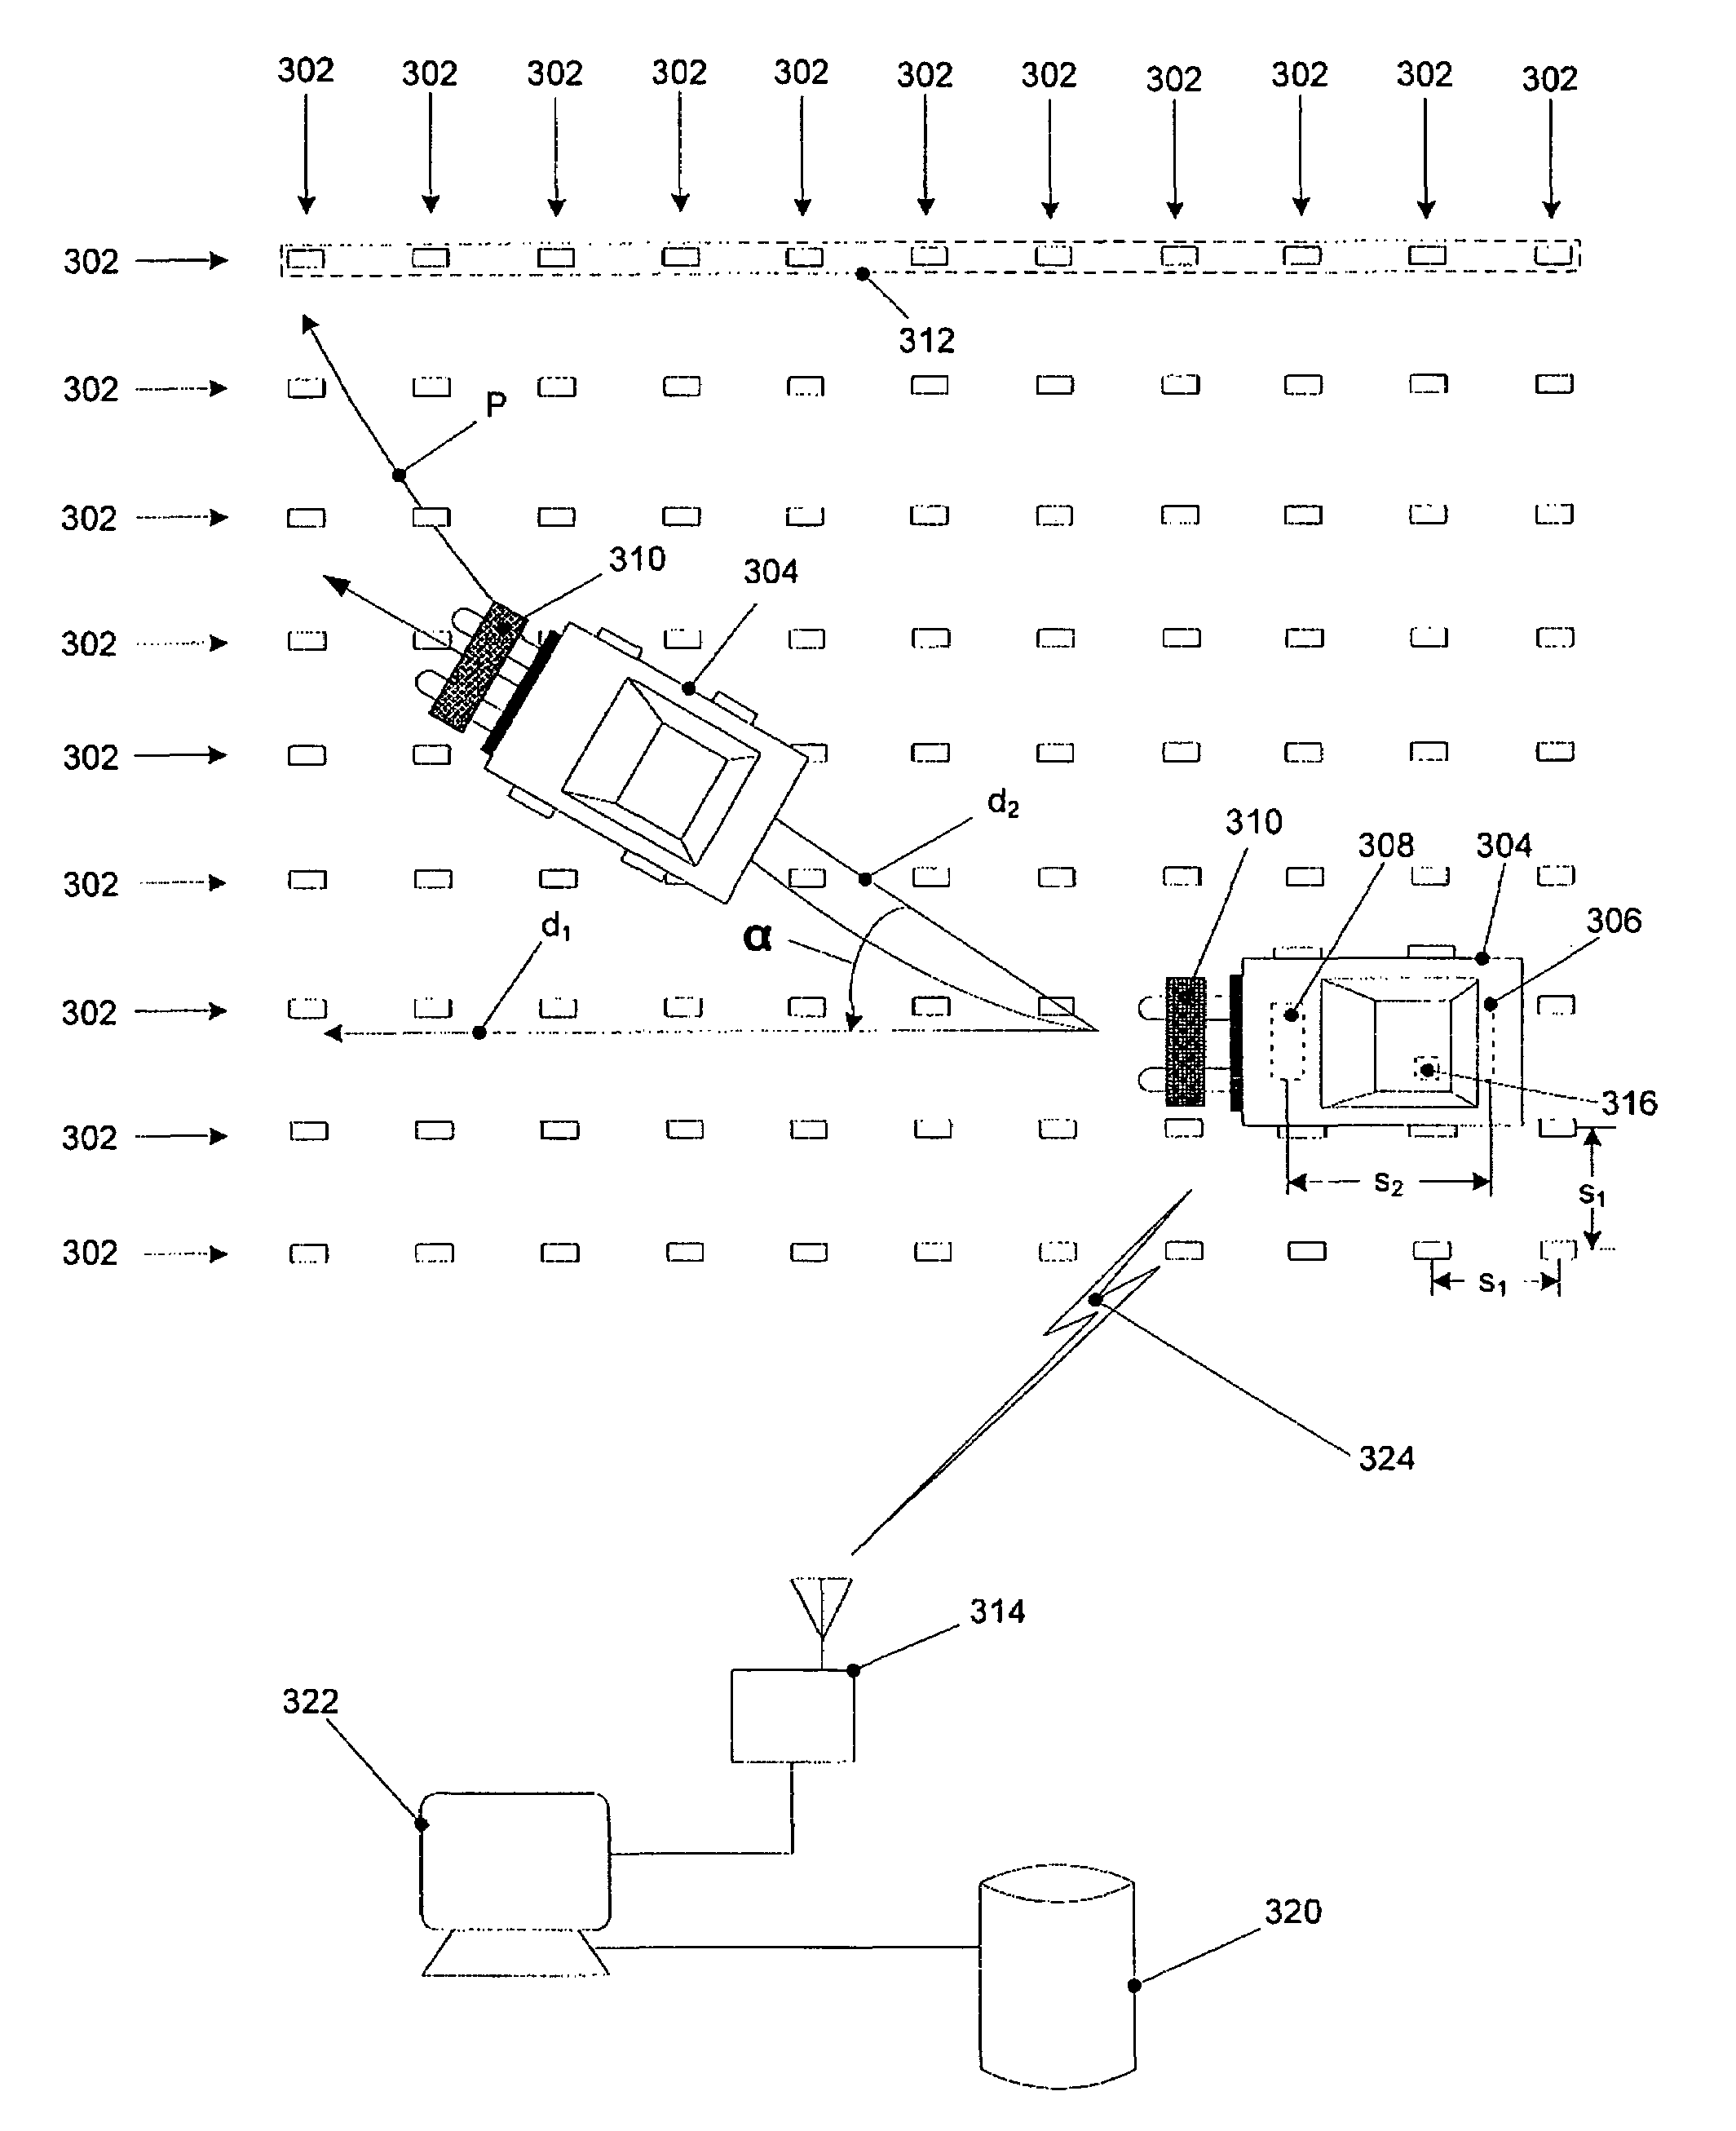 Systems and methods for tracking the location of items within a controlled area